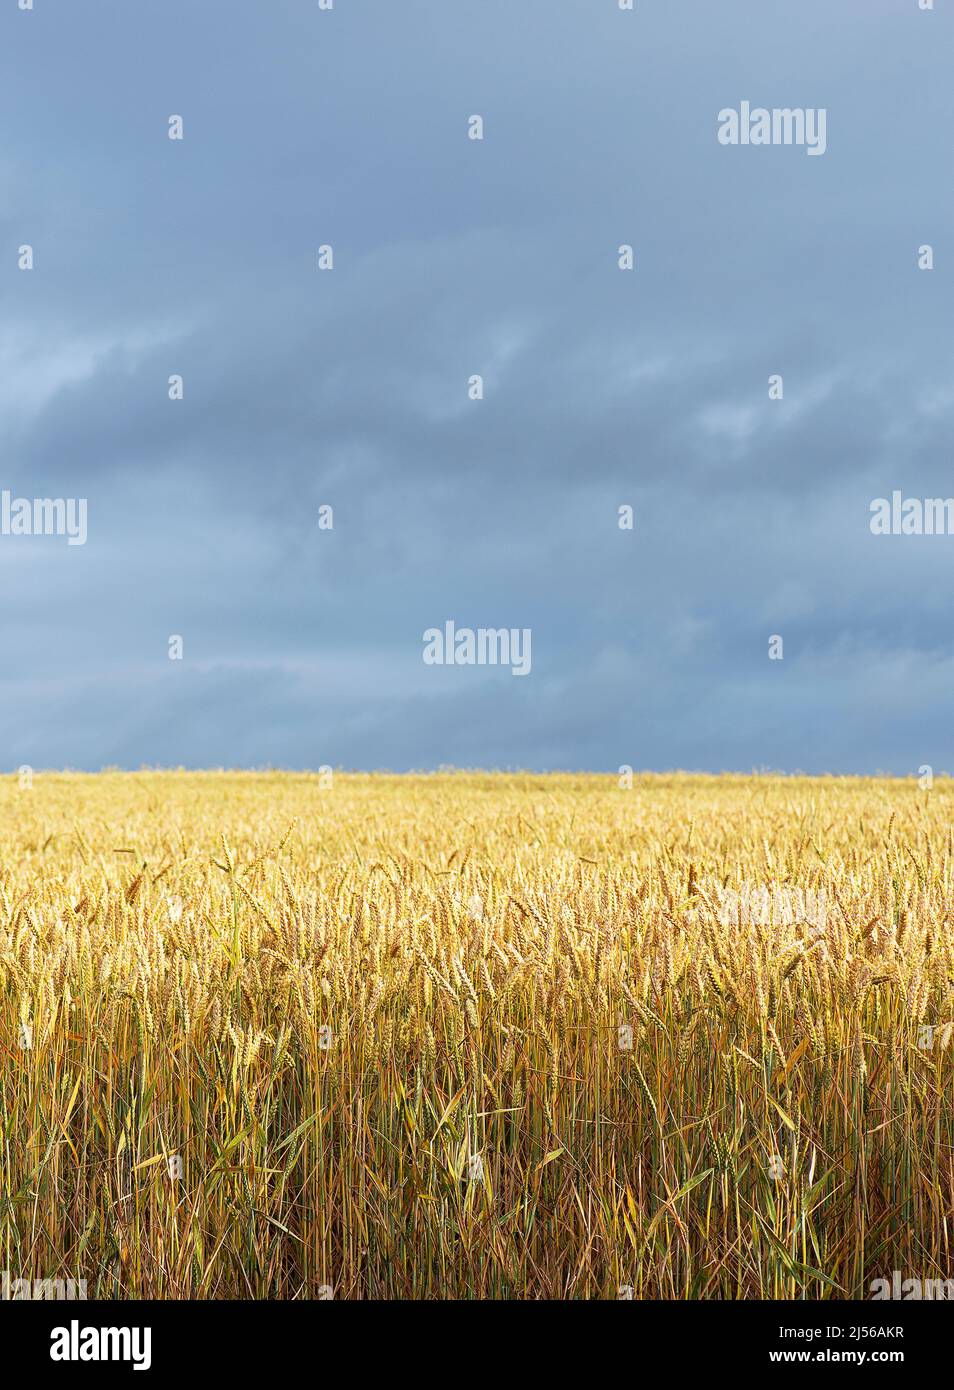 A field of golden wheat under stormy skies. Stock Photo